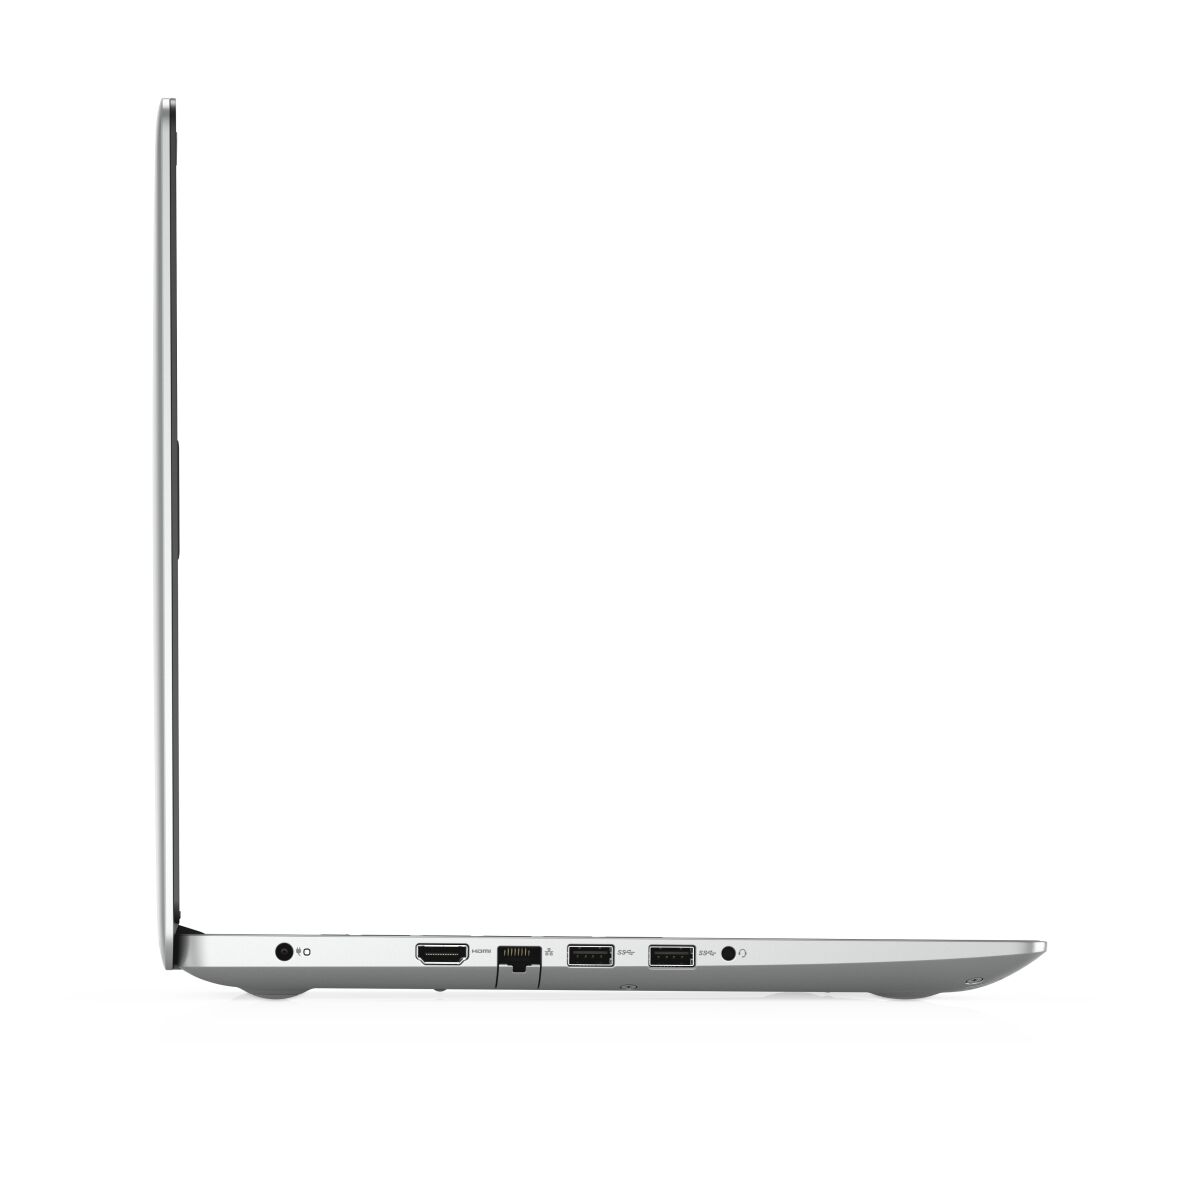 DELL Inspiron 3581 - INS-3581-01-PLS-FR laptop specifications